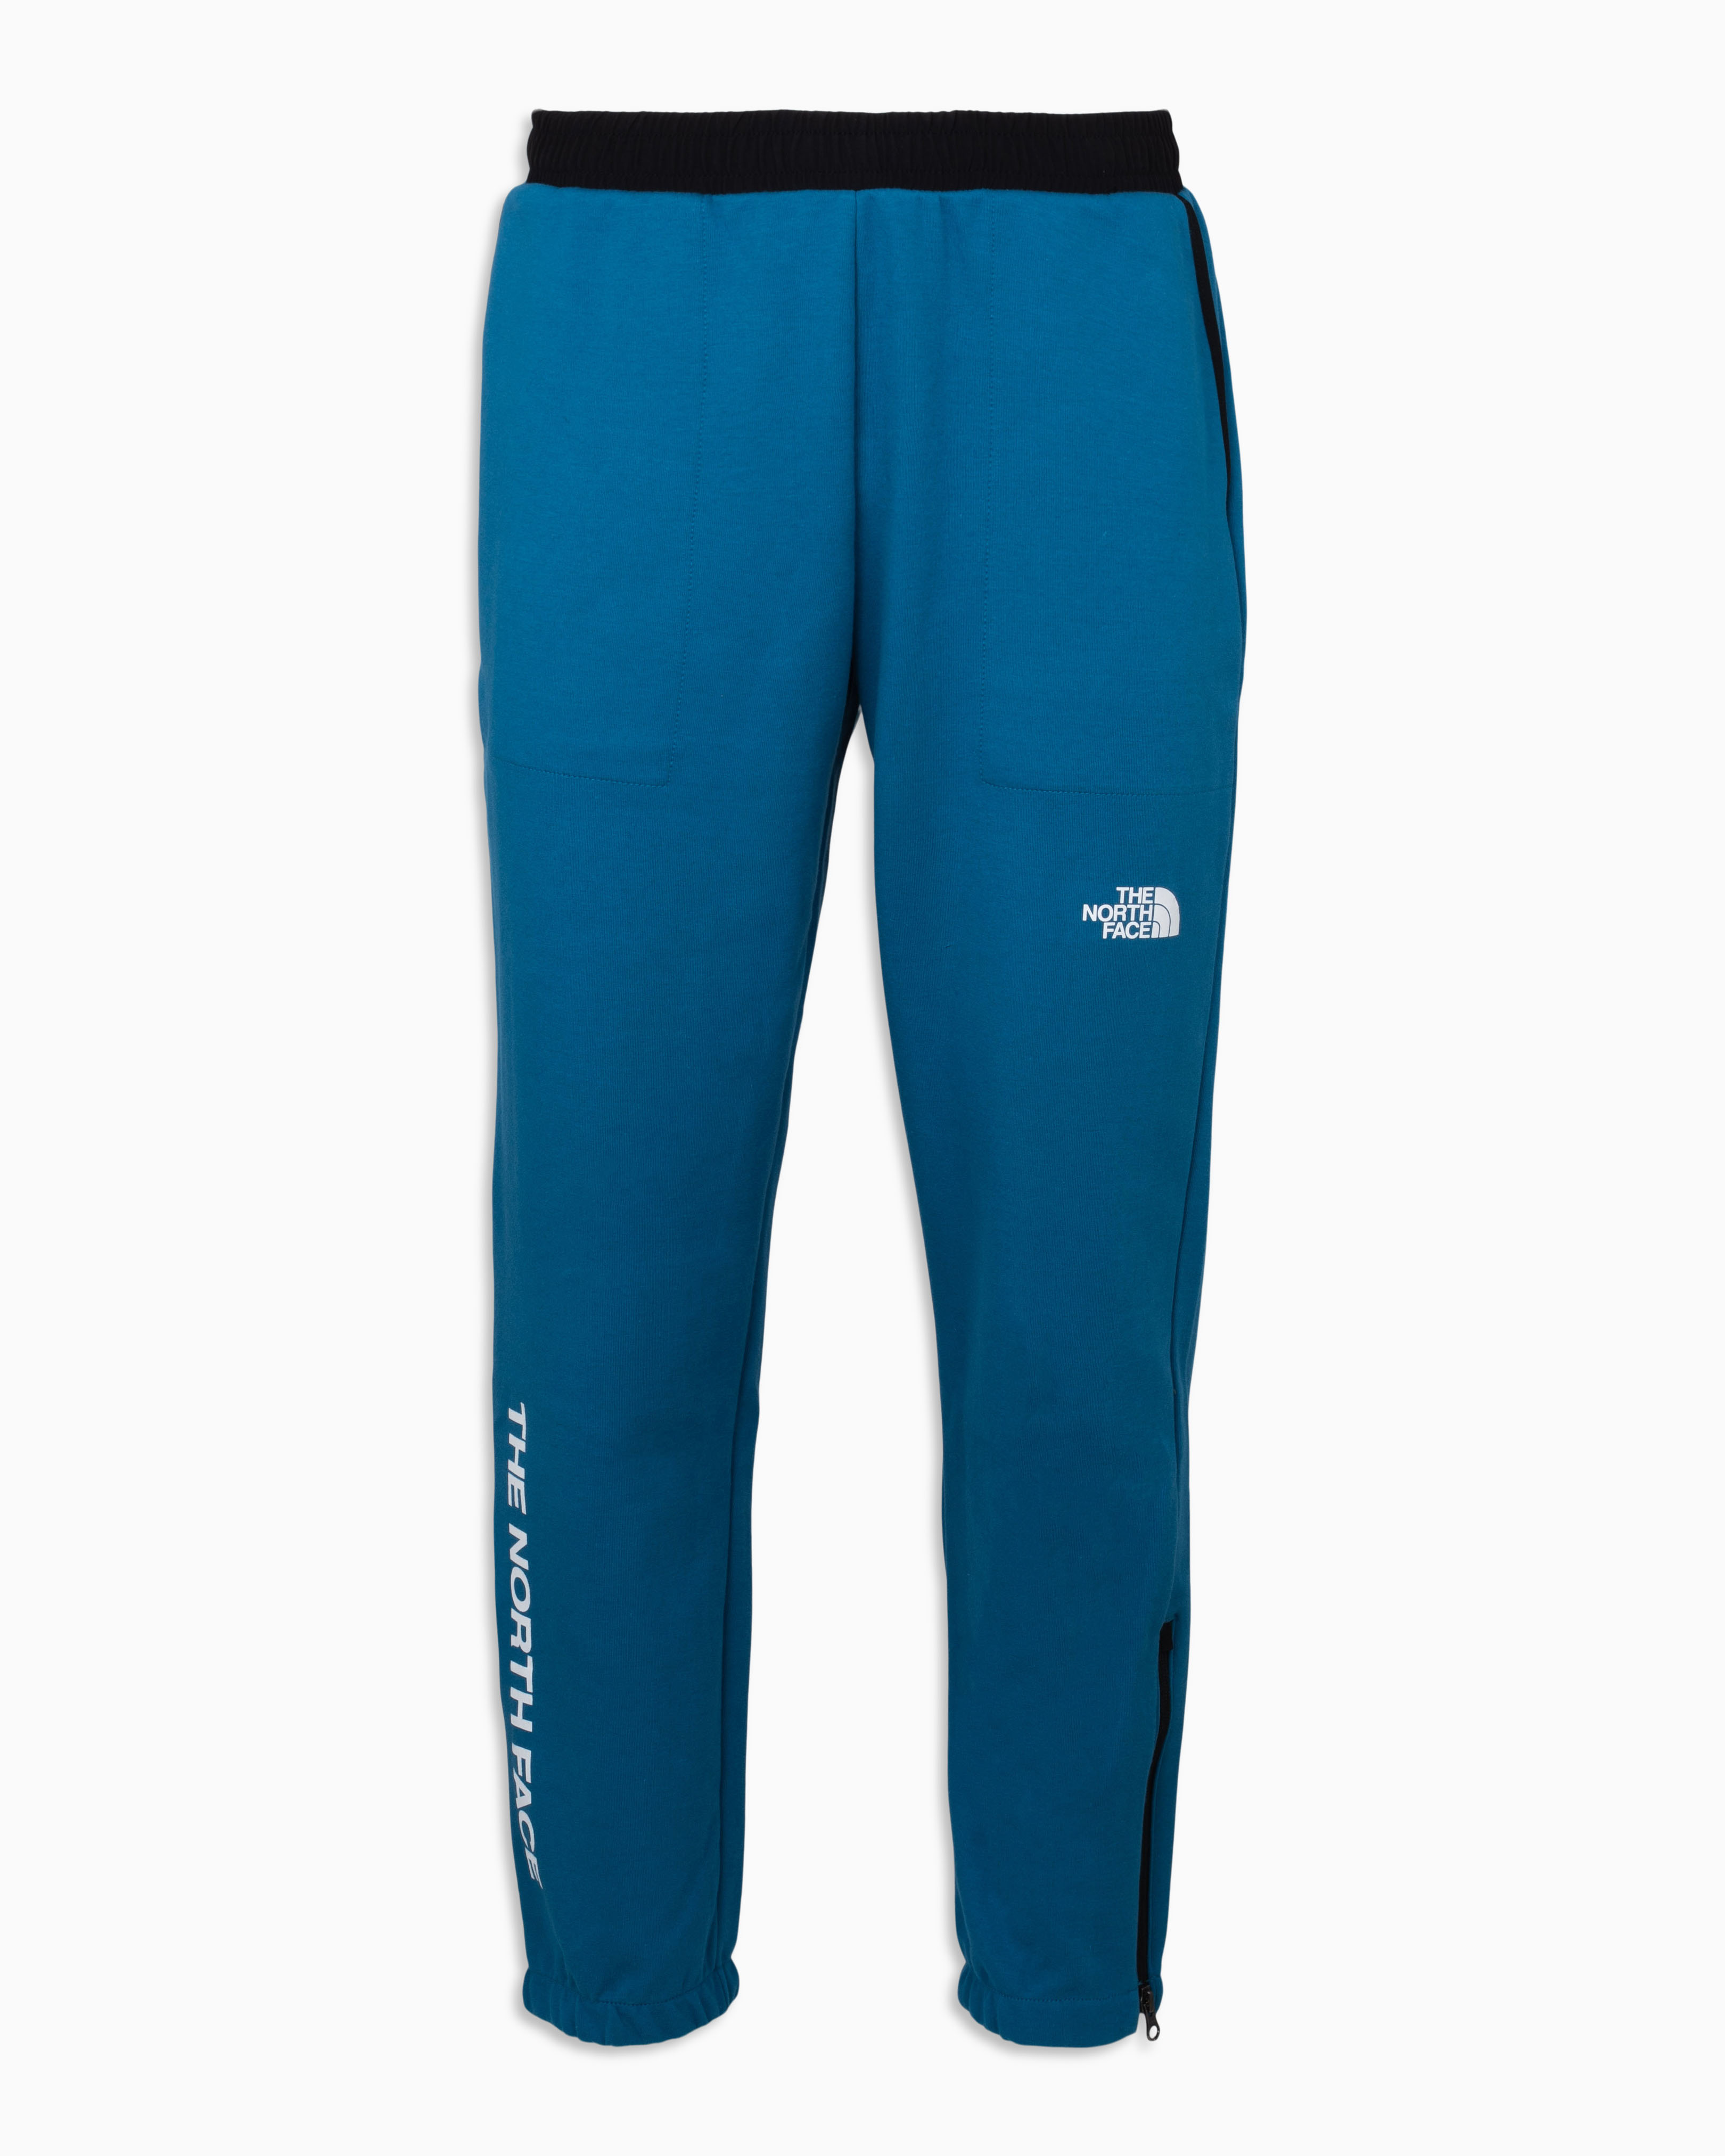 The North Face Men's Pants | Backcountry.com